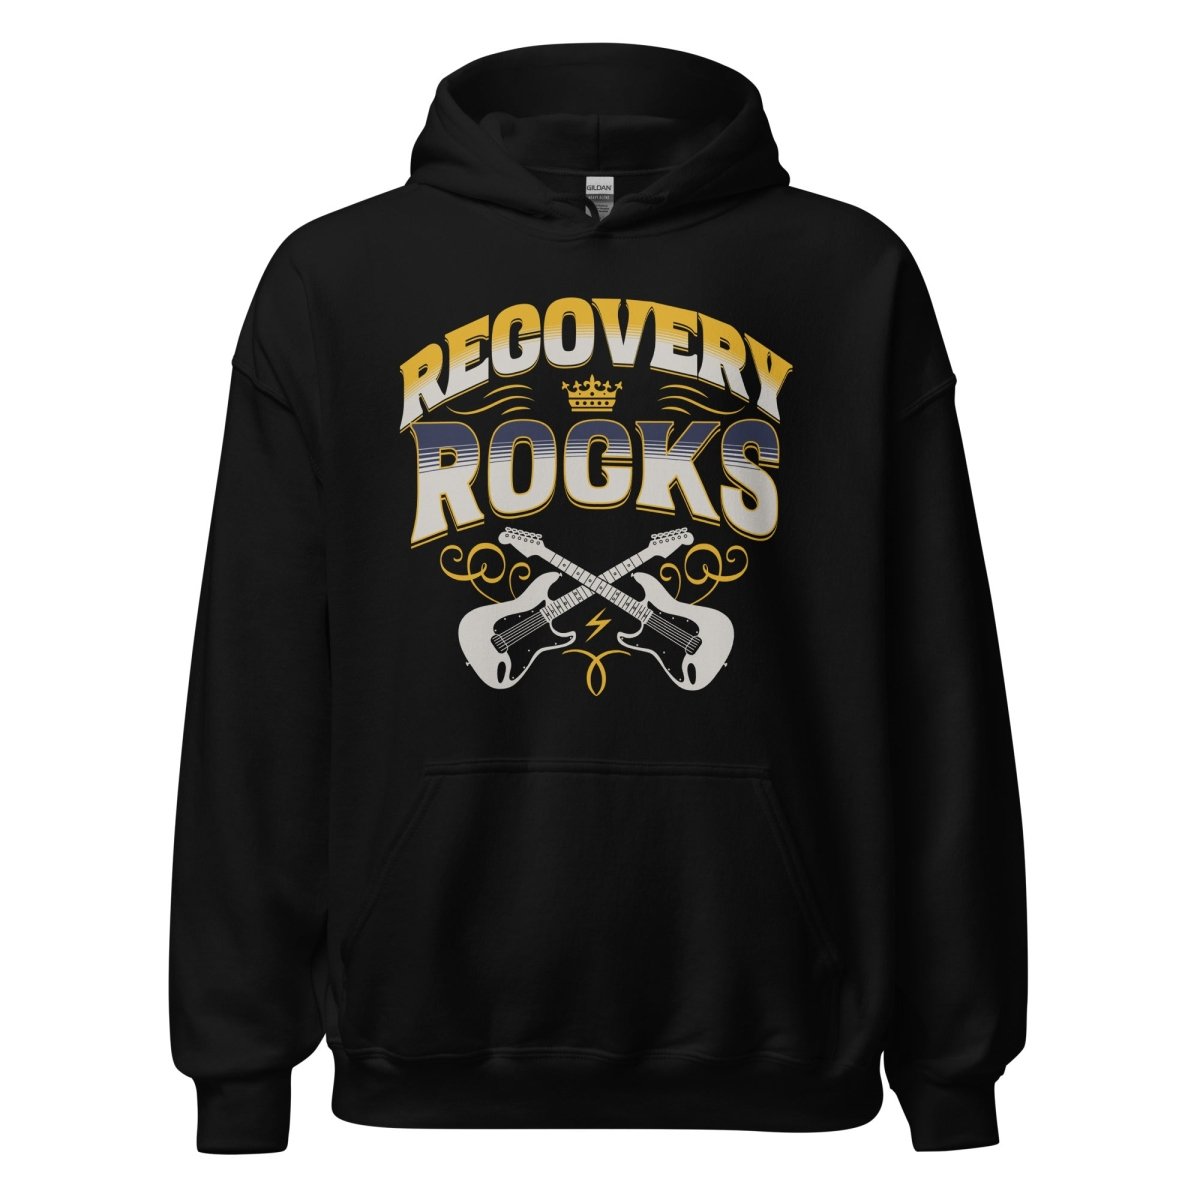 Recovery Rocks Out: Amplify Your Comeback Unisex Hoodie - Black / S | Sobervation